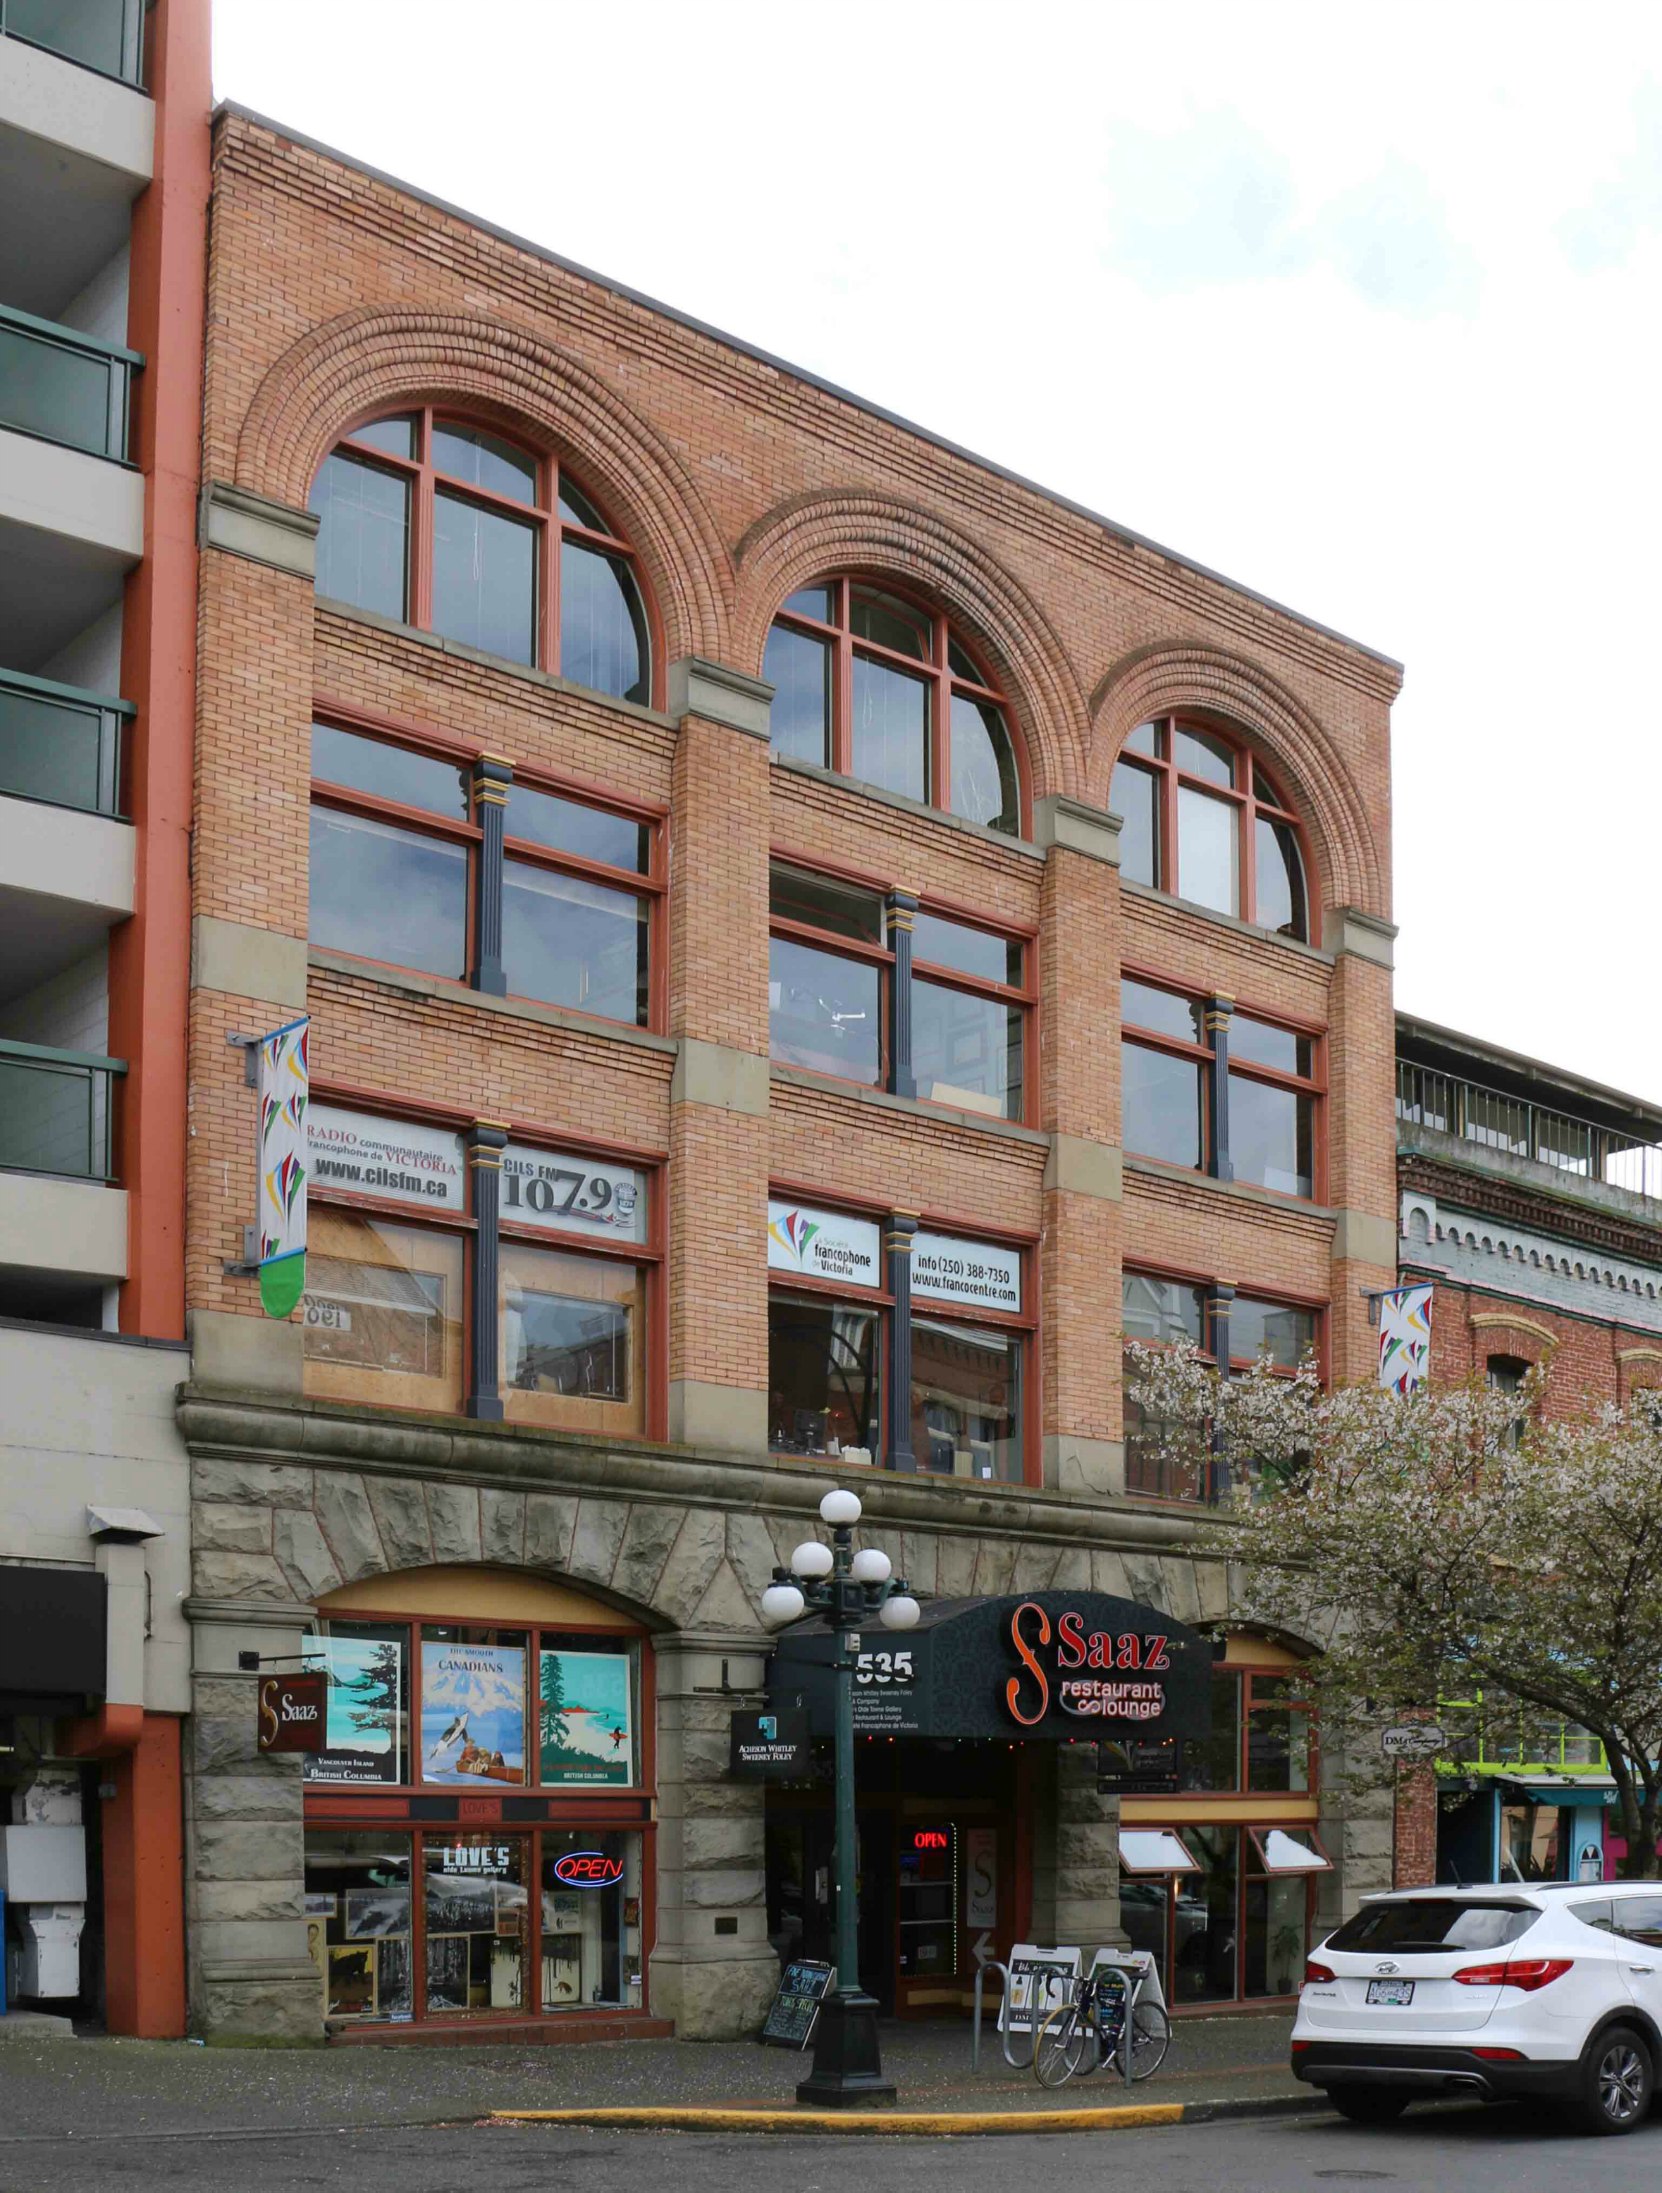 535 Yates Street, built in 1900 and now listed on the Canadian Register of Historic Places